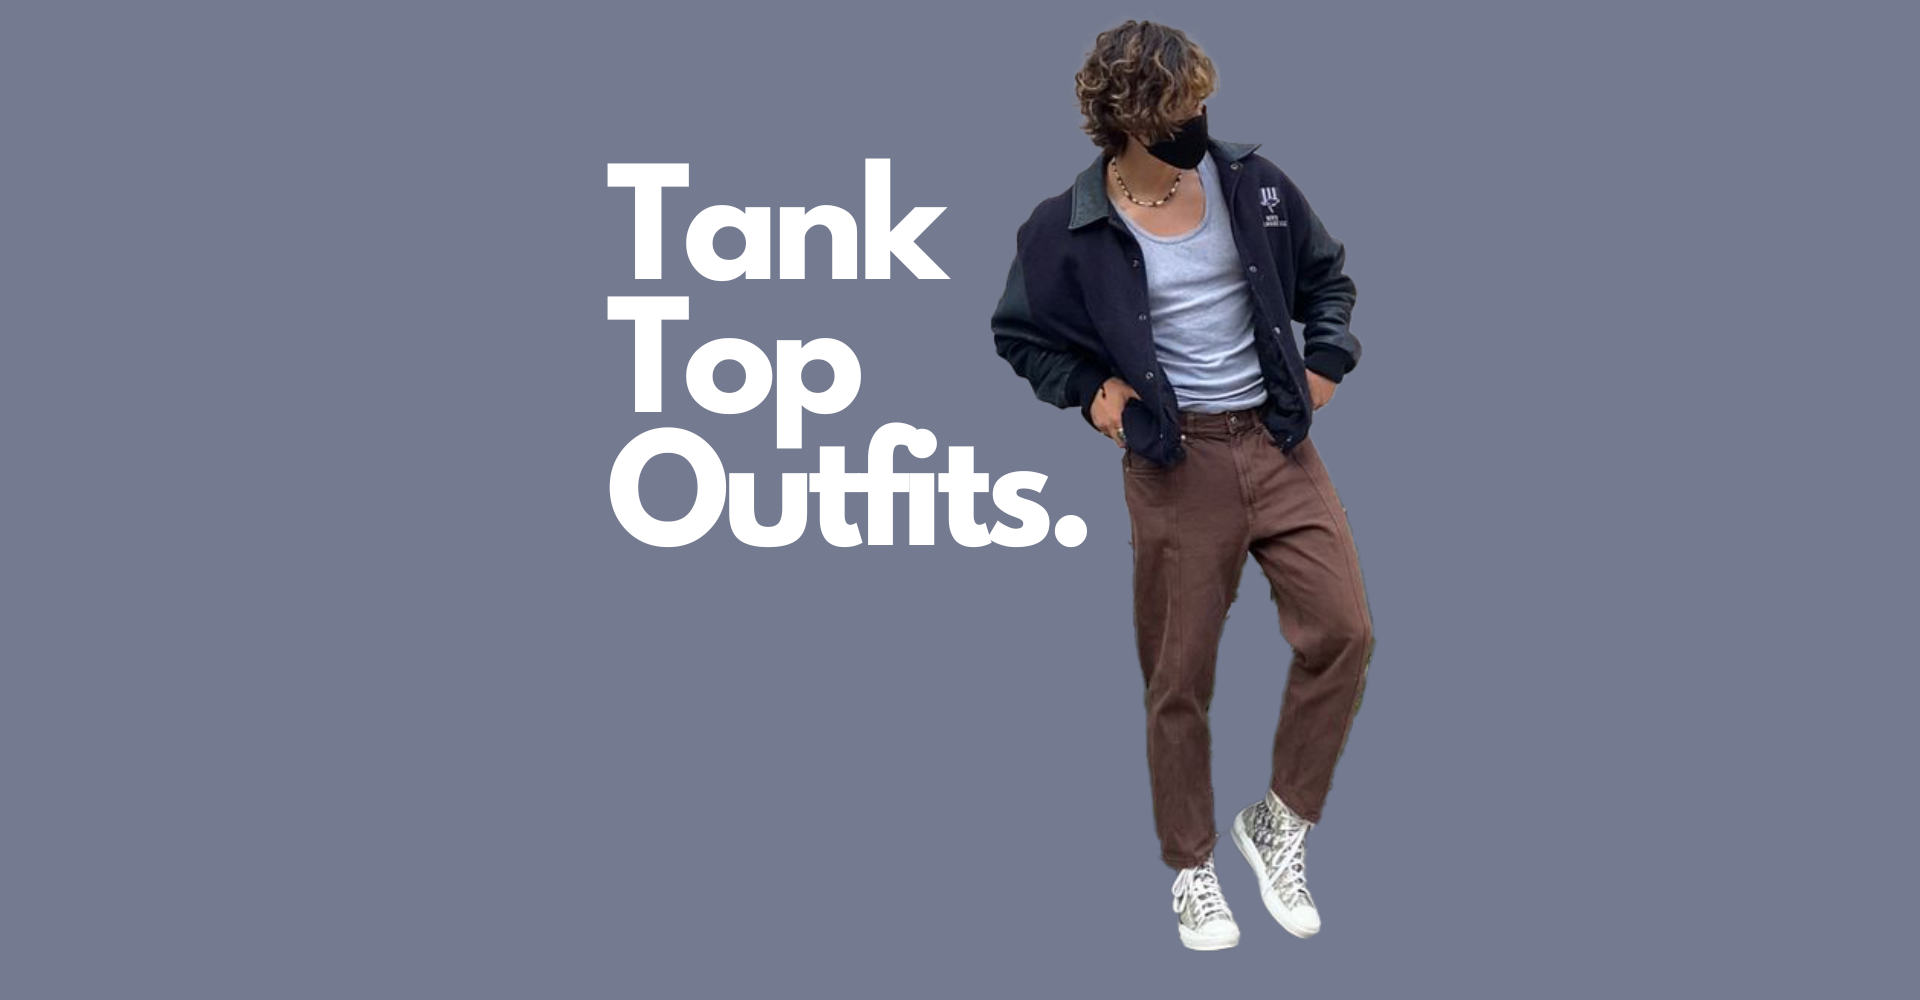 https://onpointfresh.com/wp-content/uploads/2022/08/Tank-Top-Outfits..png